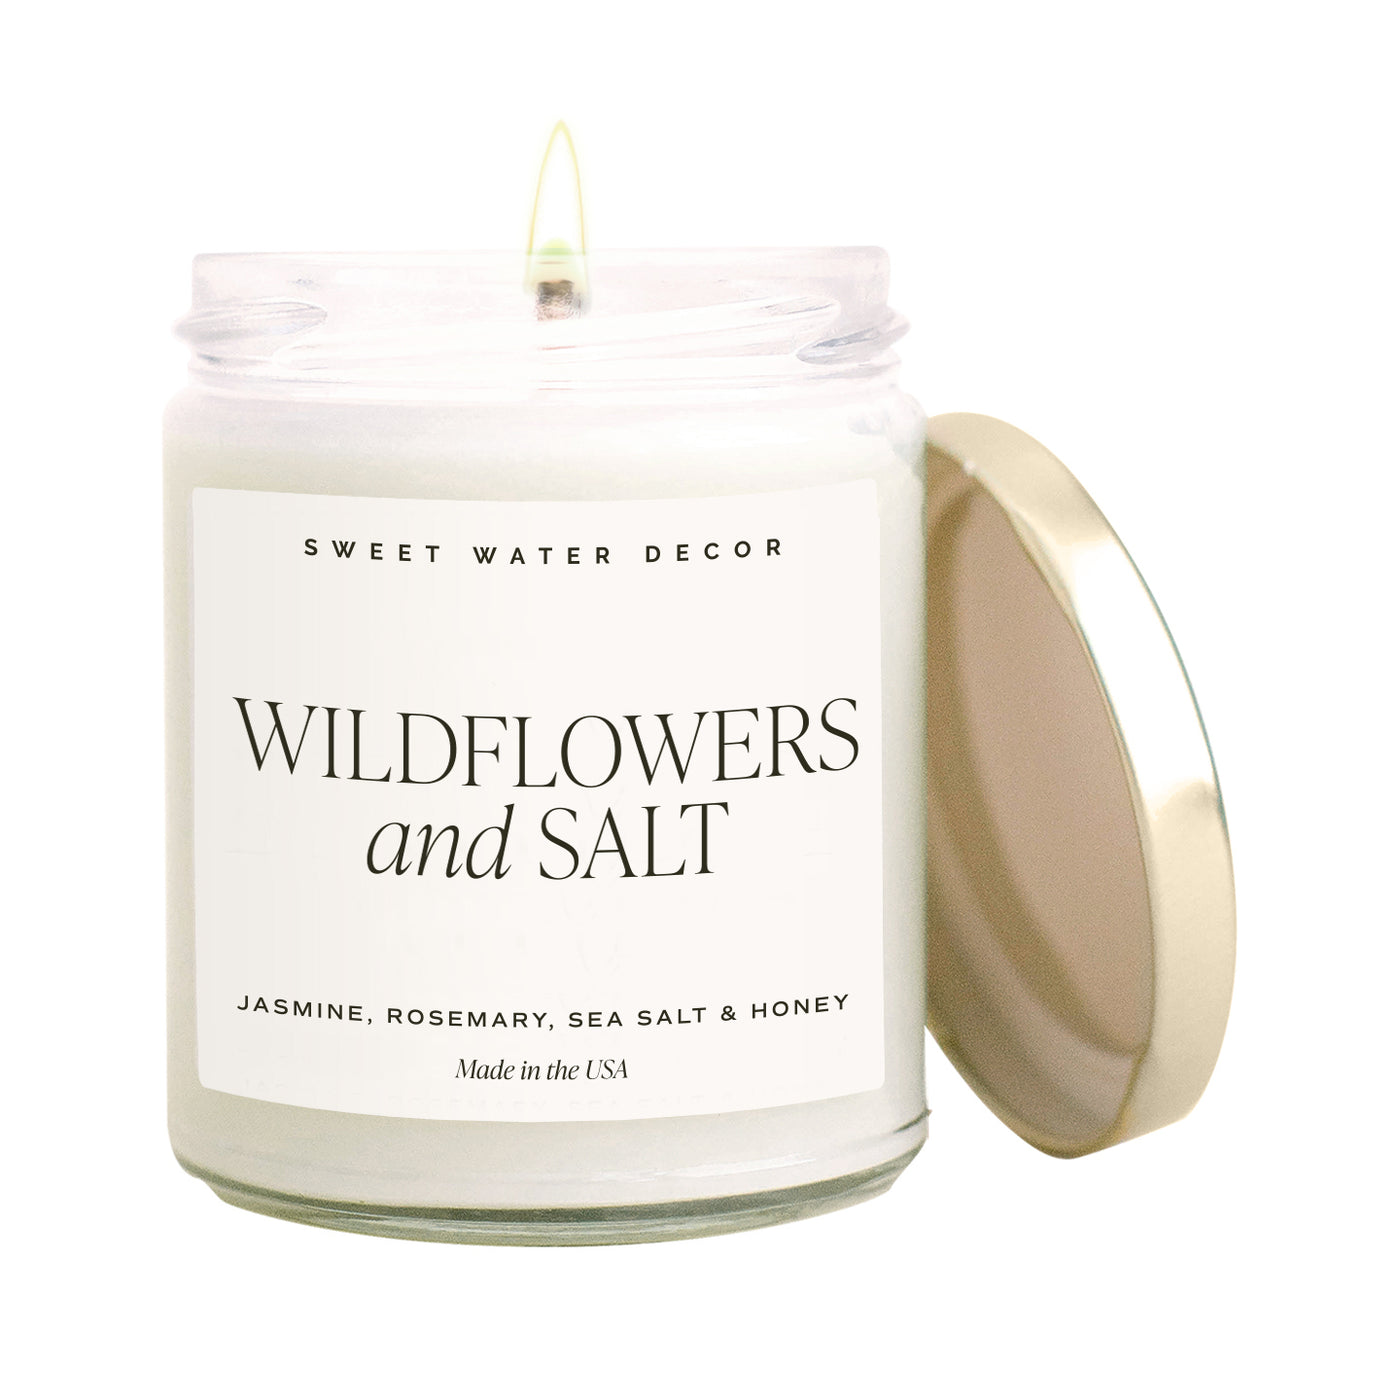 Wildflowers and Salt Soy Candle - Clear Jar - 9 oz - Sweet Water Decor - Candles